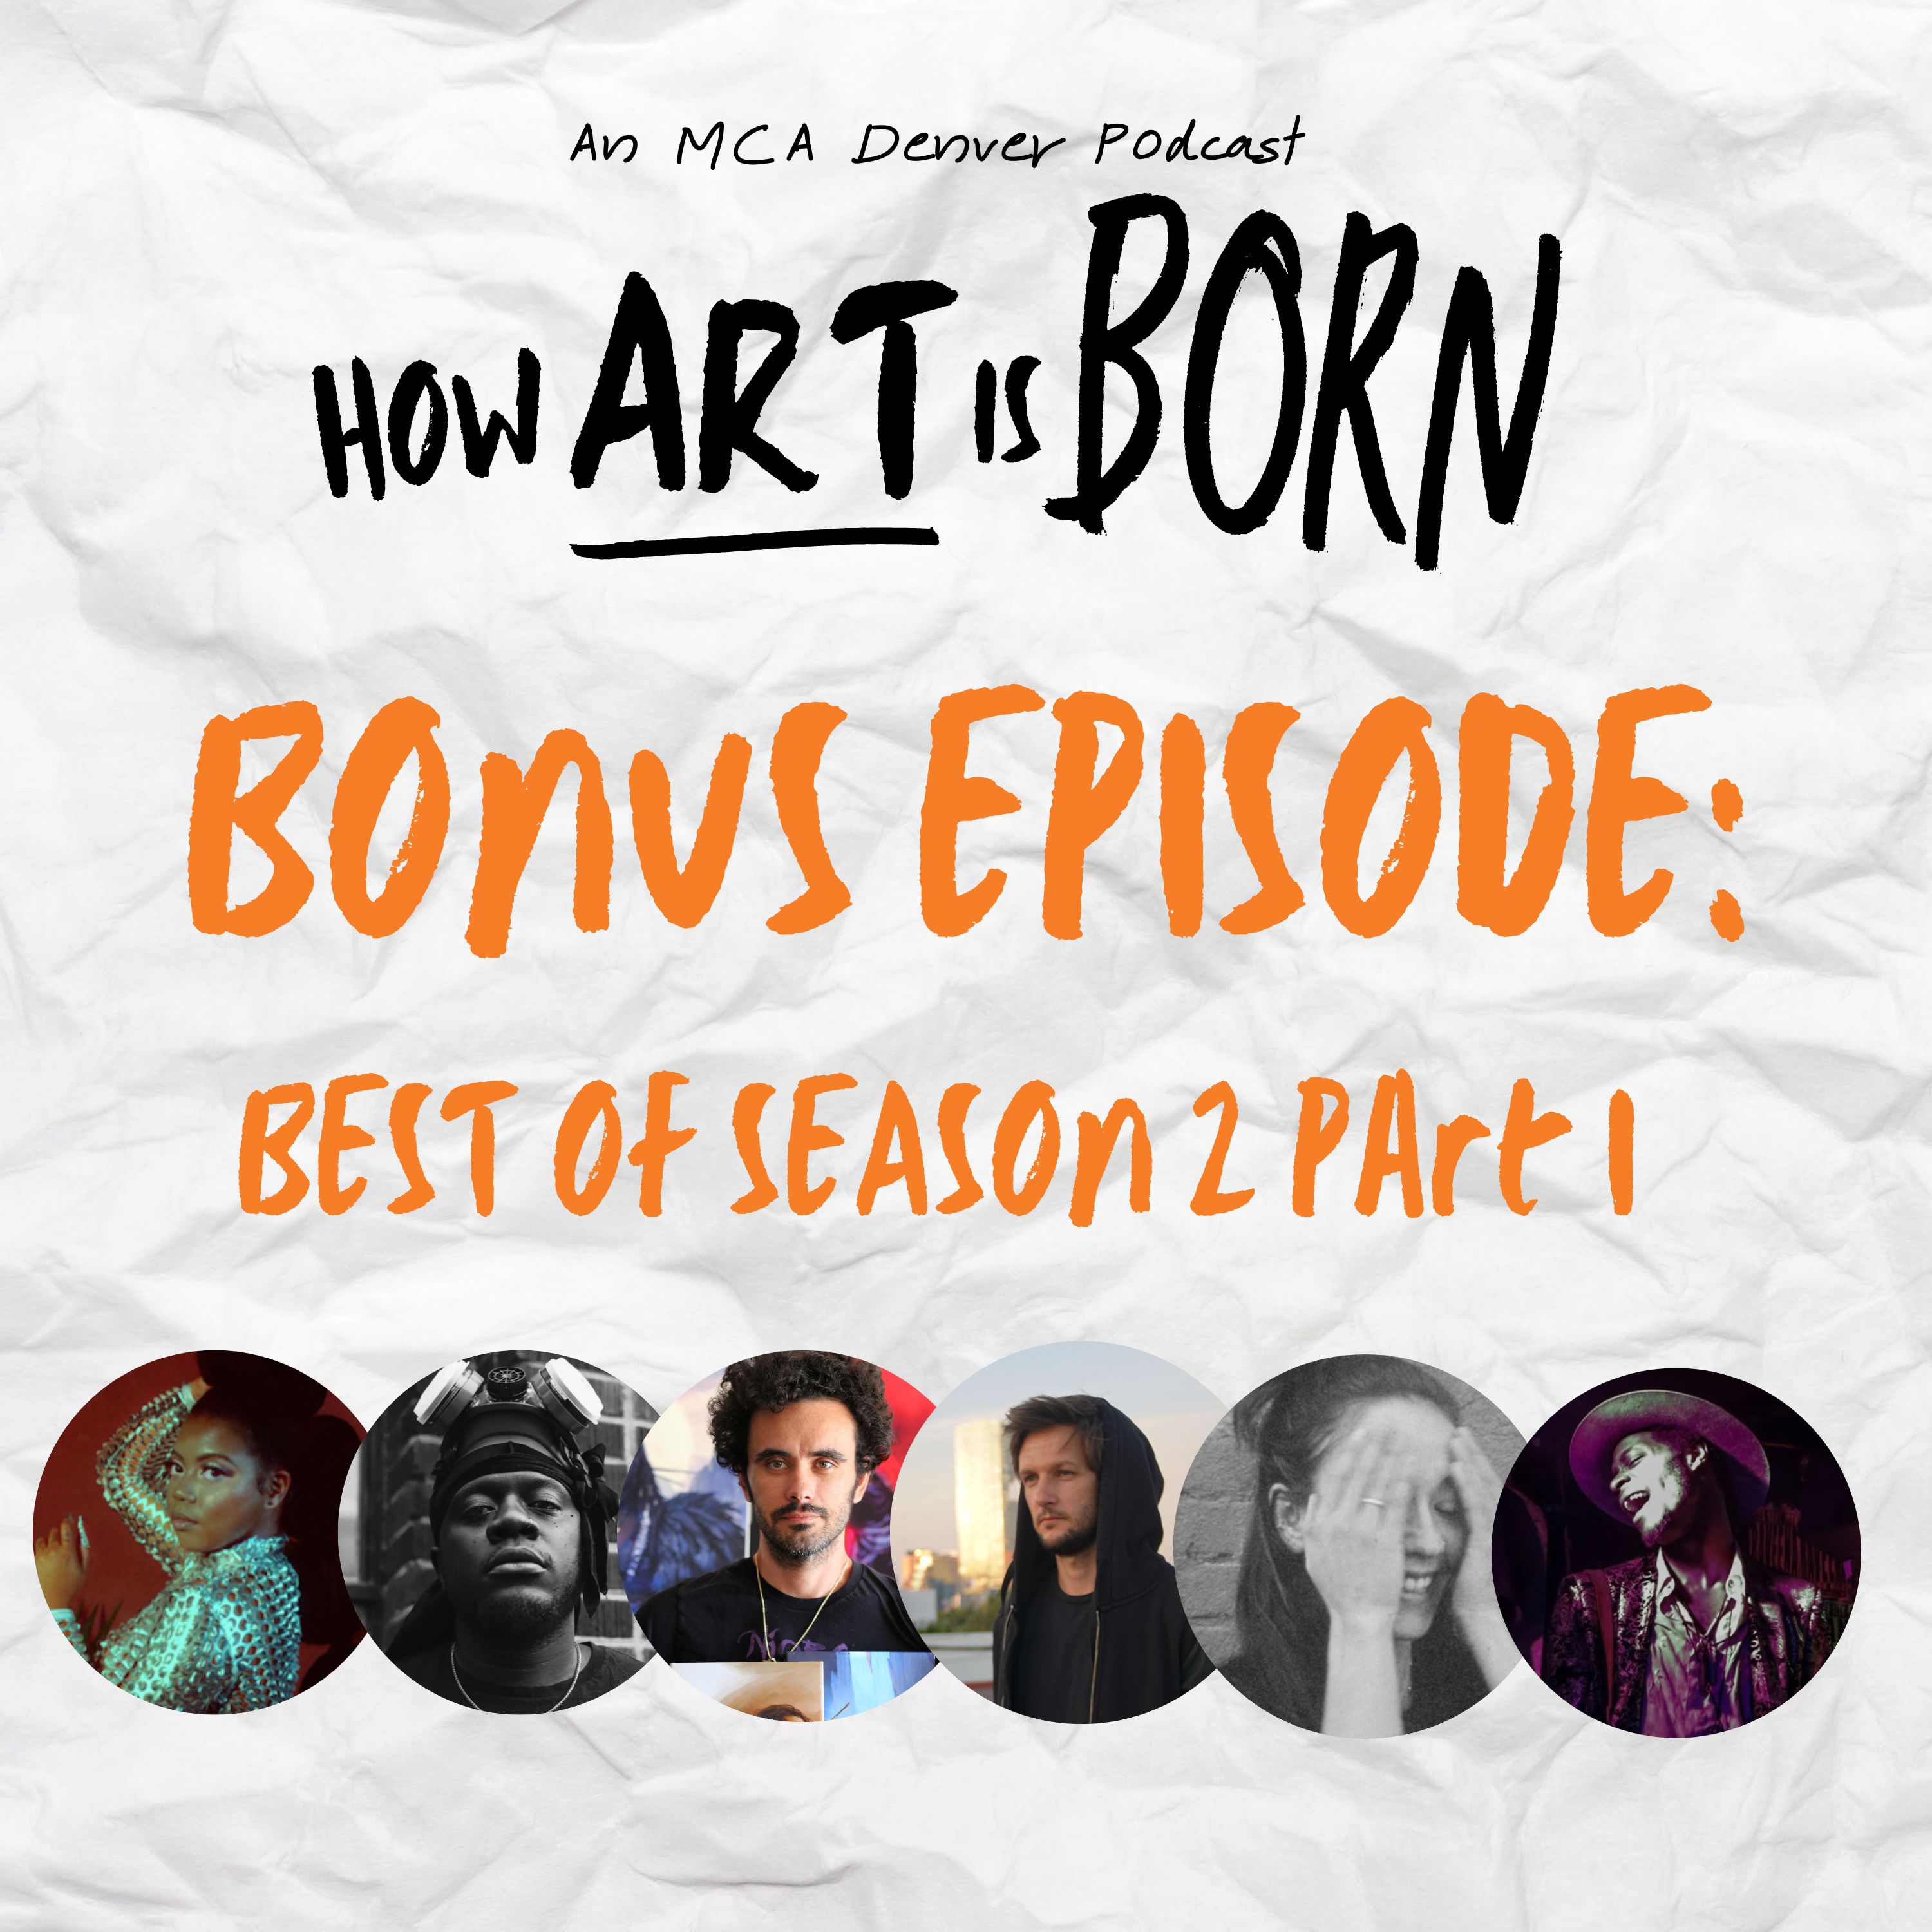 Image with text. A crumpled white piece of paper as background with the text "How Art is Born. Bonus Episode: Best of Season 2 Part I". Below the text are headshots of guests AJ Haynes, Blake Jackson, Sebastian Jones, Diego Gerard Morrison, Lucia Hinojosa, and Wes Watkins.